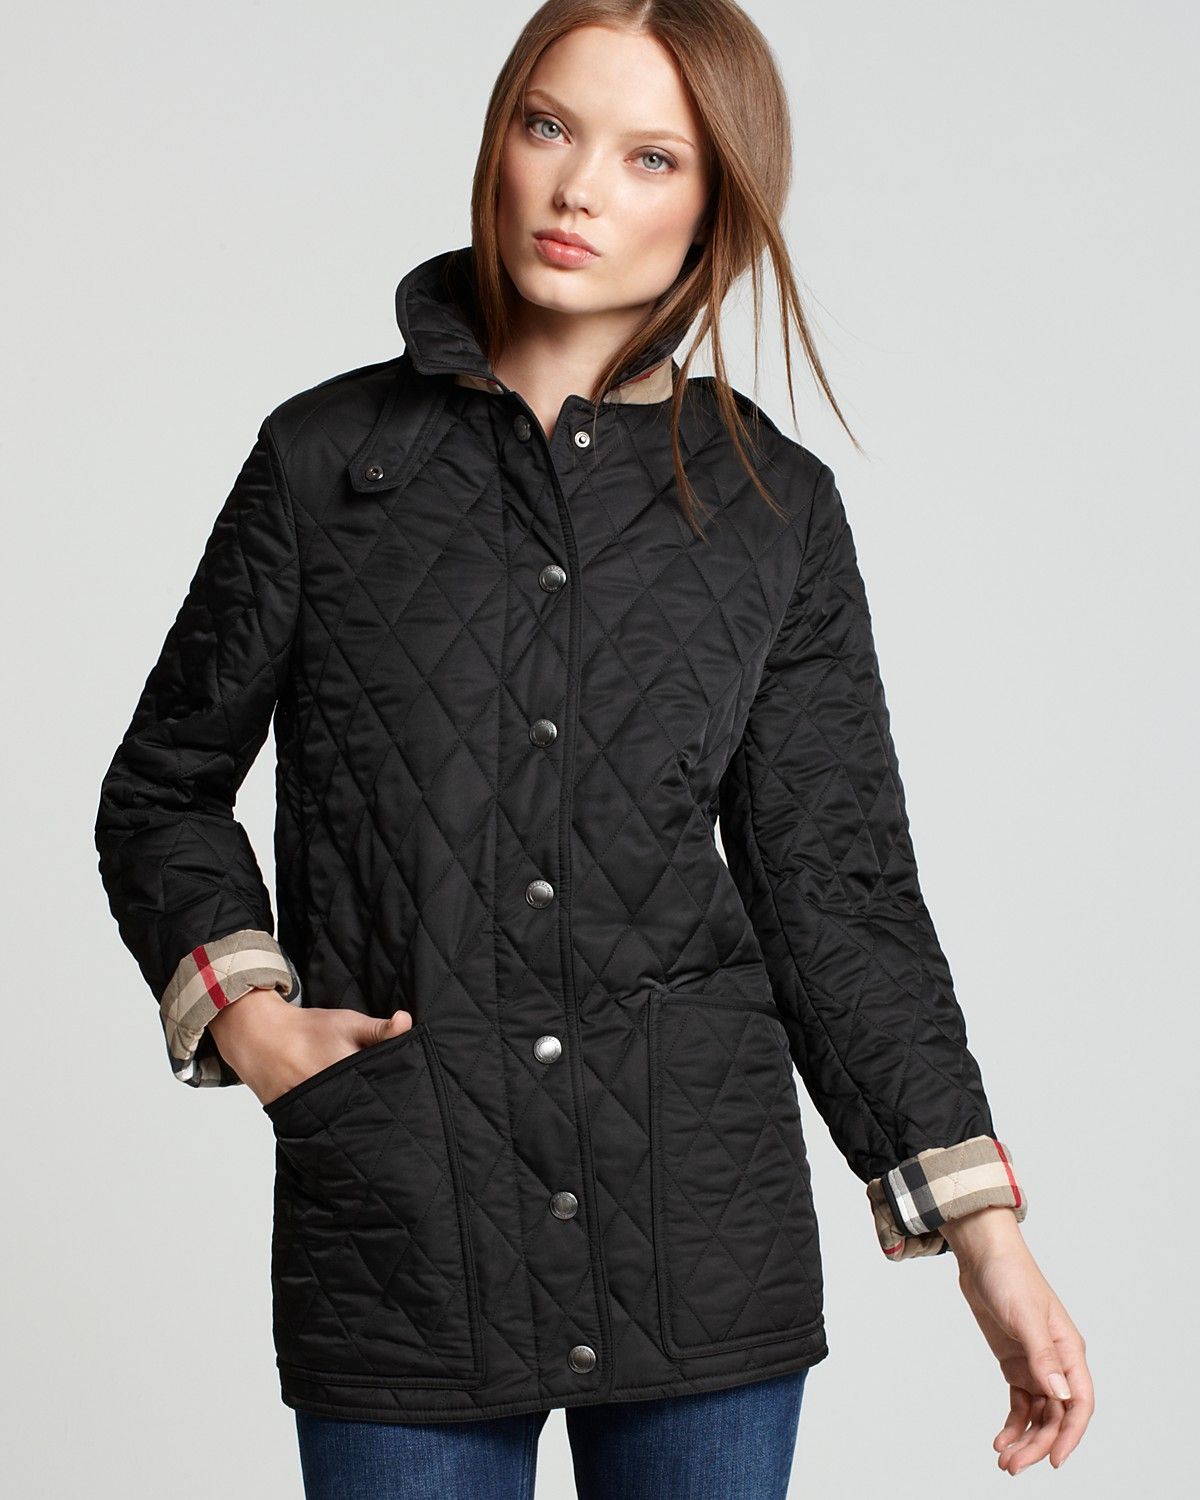 Quilted coats for women – In Sale: Quilted coat for ladies especially popular